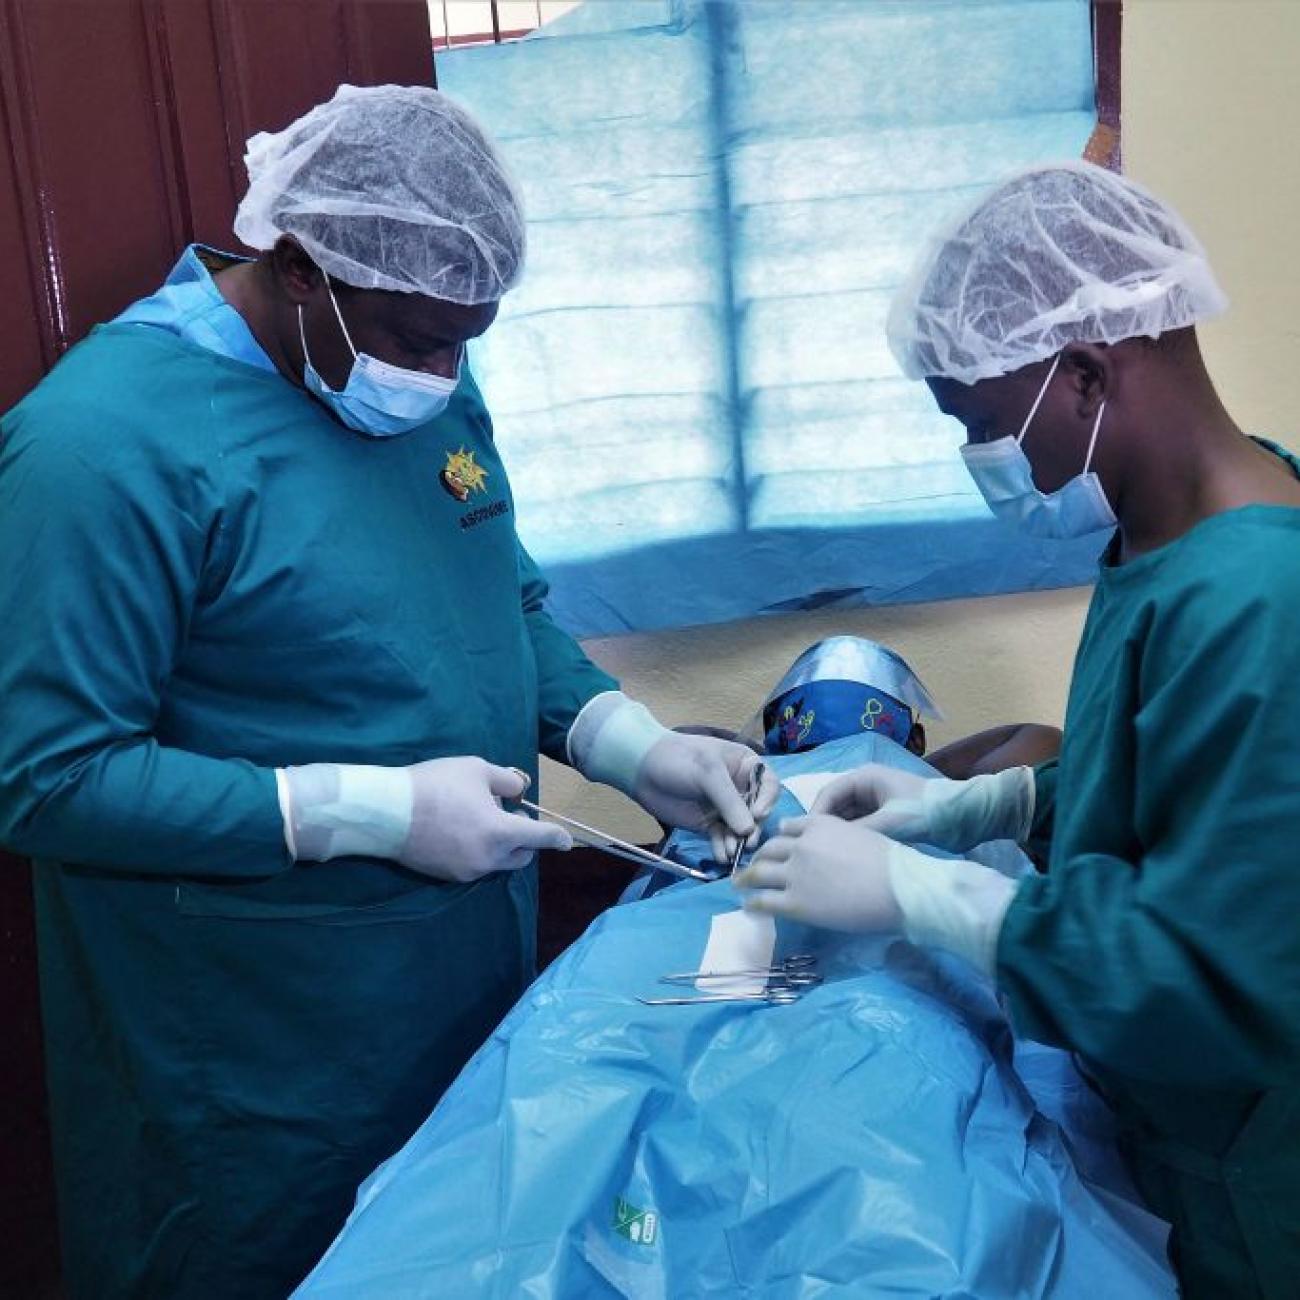 Doctor Georges Bwelle (L), head of the visceral surgery department at the Yaounde Central Hospital, and one of his colleagues operate on a patient at the Nkongsamba prison in Nkongsamba, Cameroon, on July 17, 2021. 